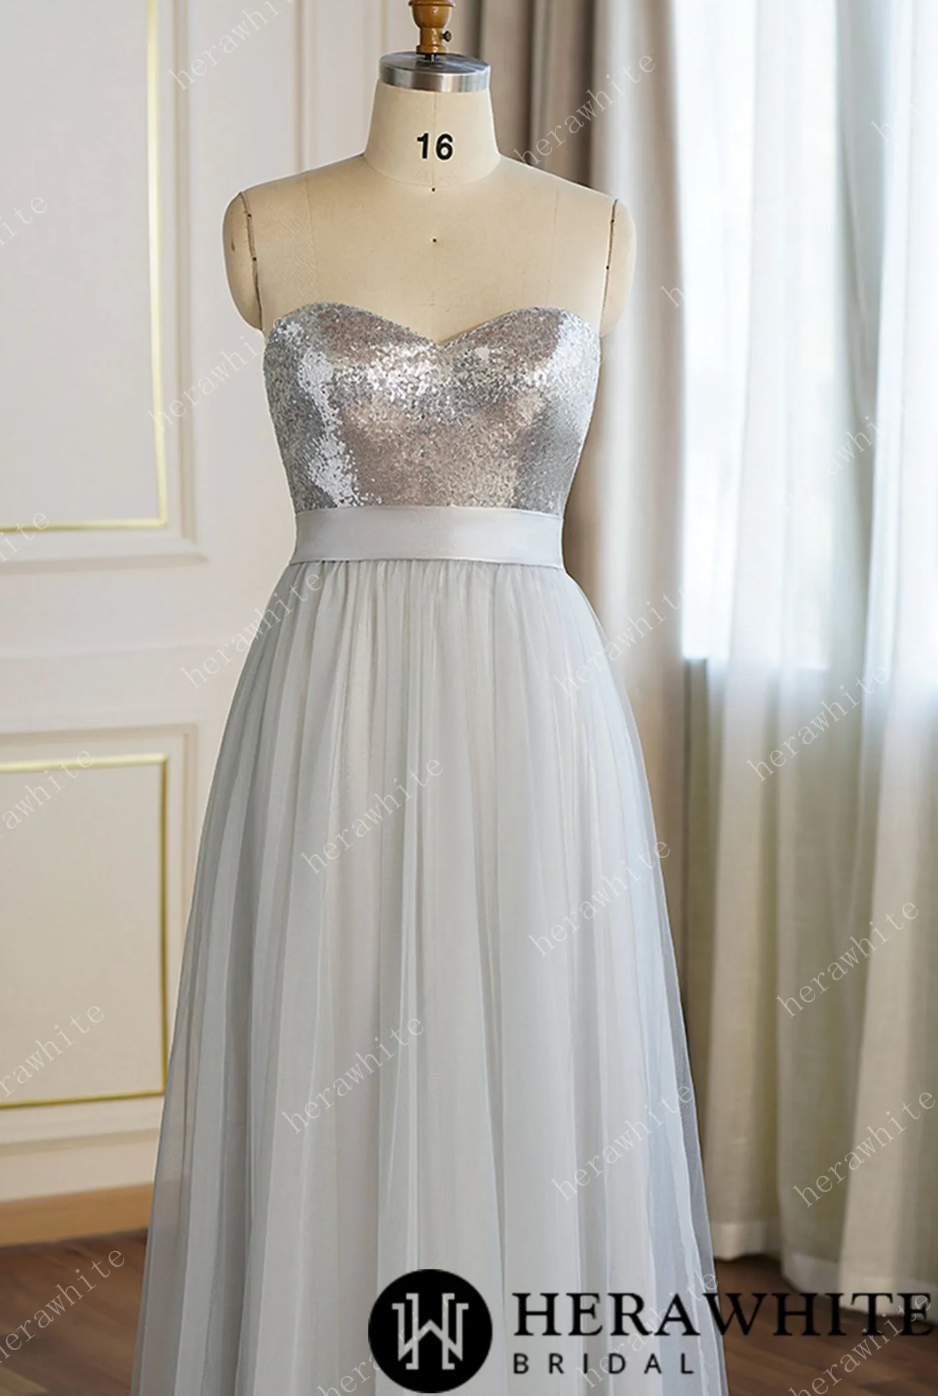 Load image into Gallery viewer, Sequin Strapless A-line Bridesmaid Gown
